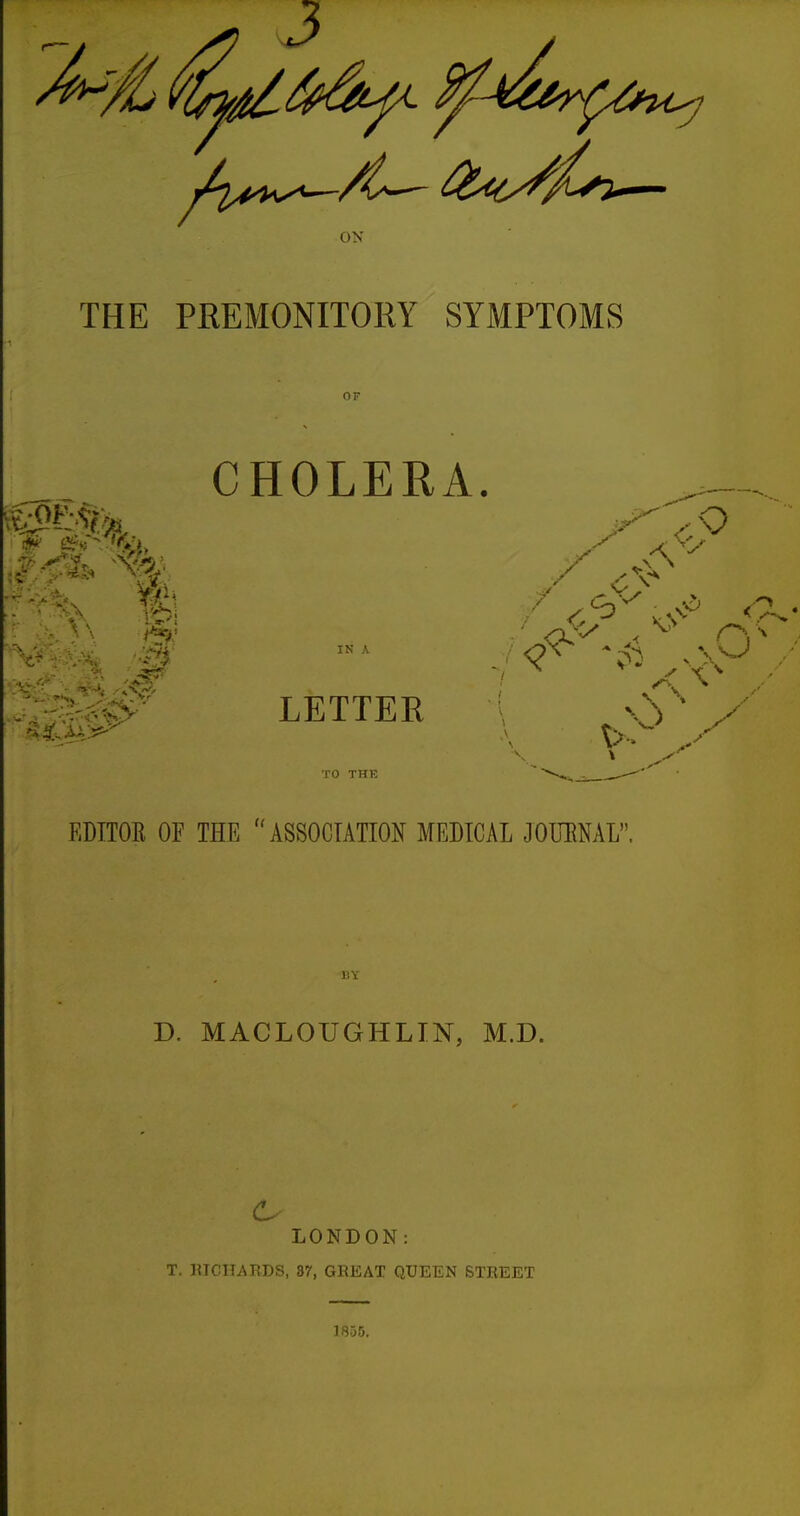 OX THE PREMONITORY SYMPTOMS OF CHOLERA. '^^^^Sl^^^ LETTER \ / TO THE EDITOR OF THE ASSOCIATION MEDICAL JOURNAL. i; i D. MACLOUGHLIN, M.D. LONDON: T. HTCIIAEDS, 87, GEEAT QUEEN STREET 1855.